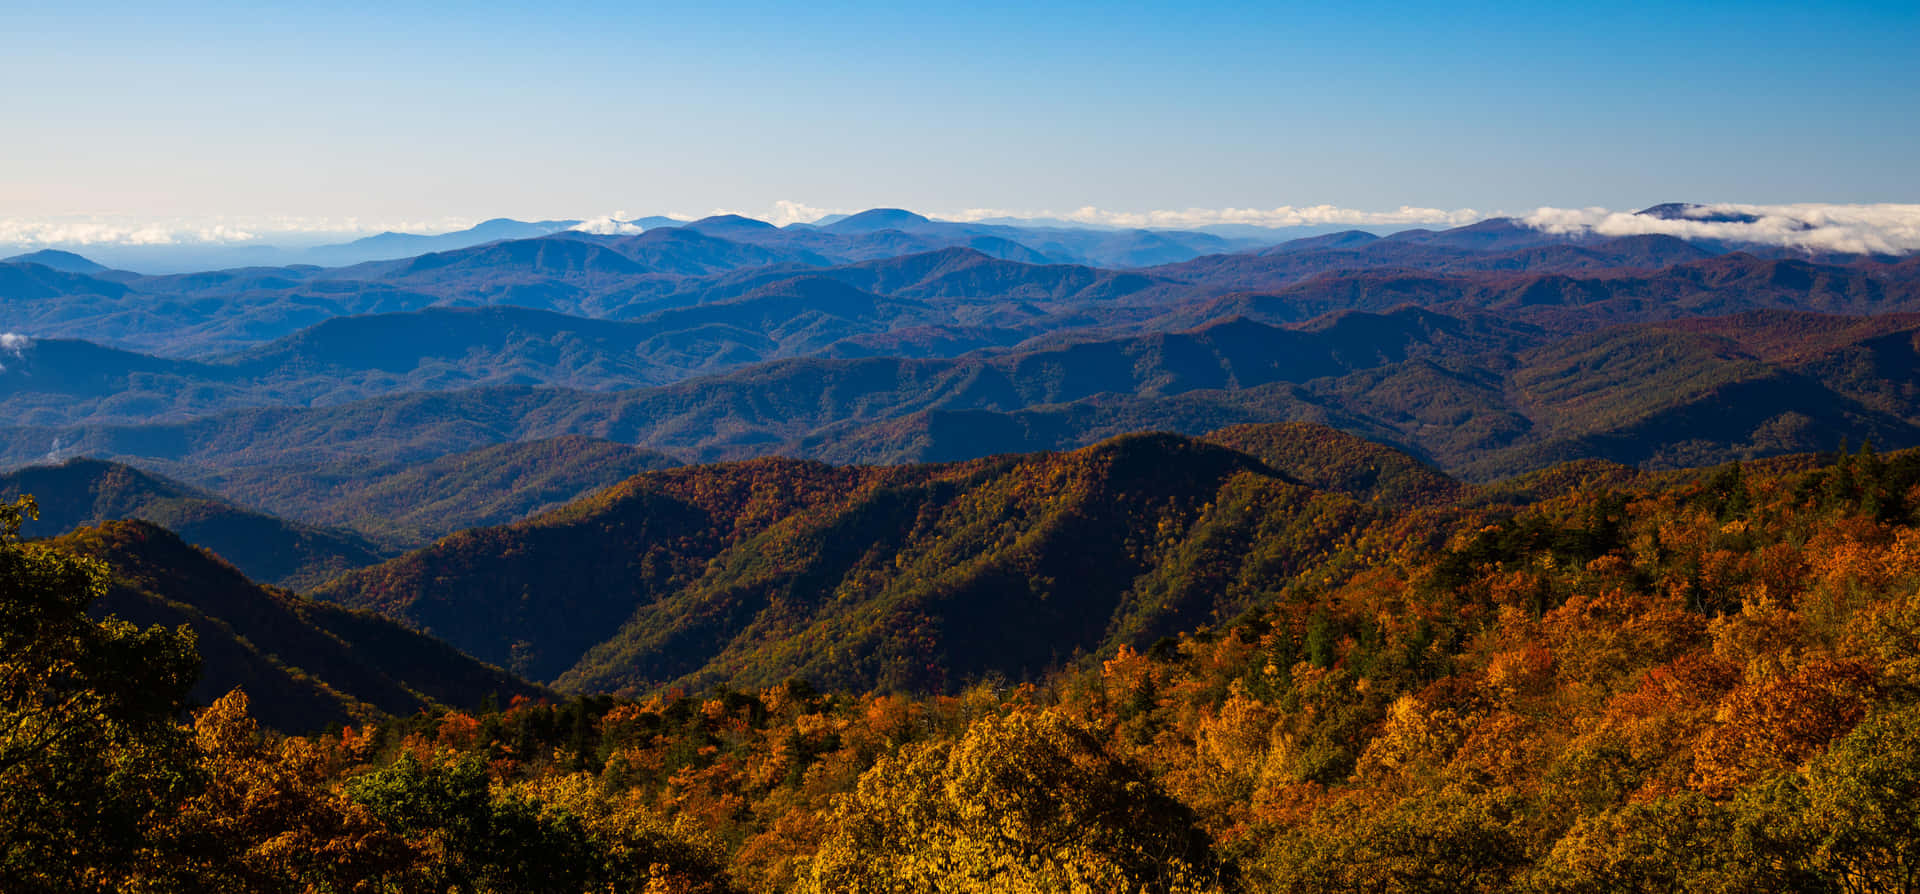 The View of Nature's Paradise - Blue Ridge Mountains Wallpaper